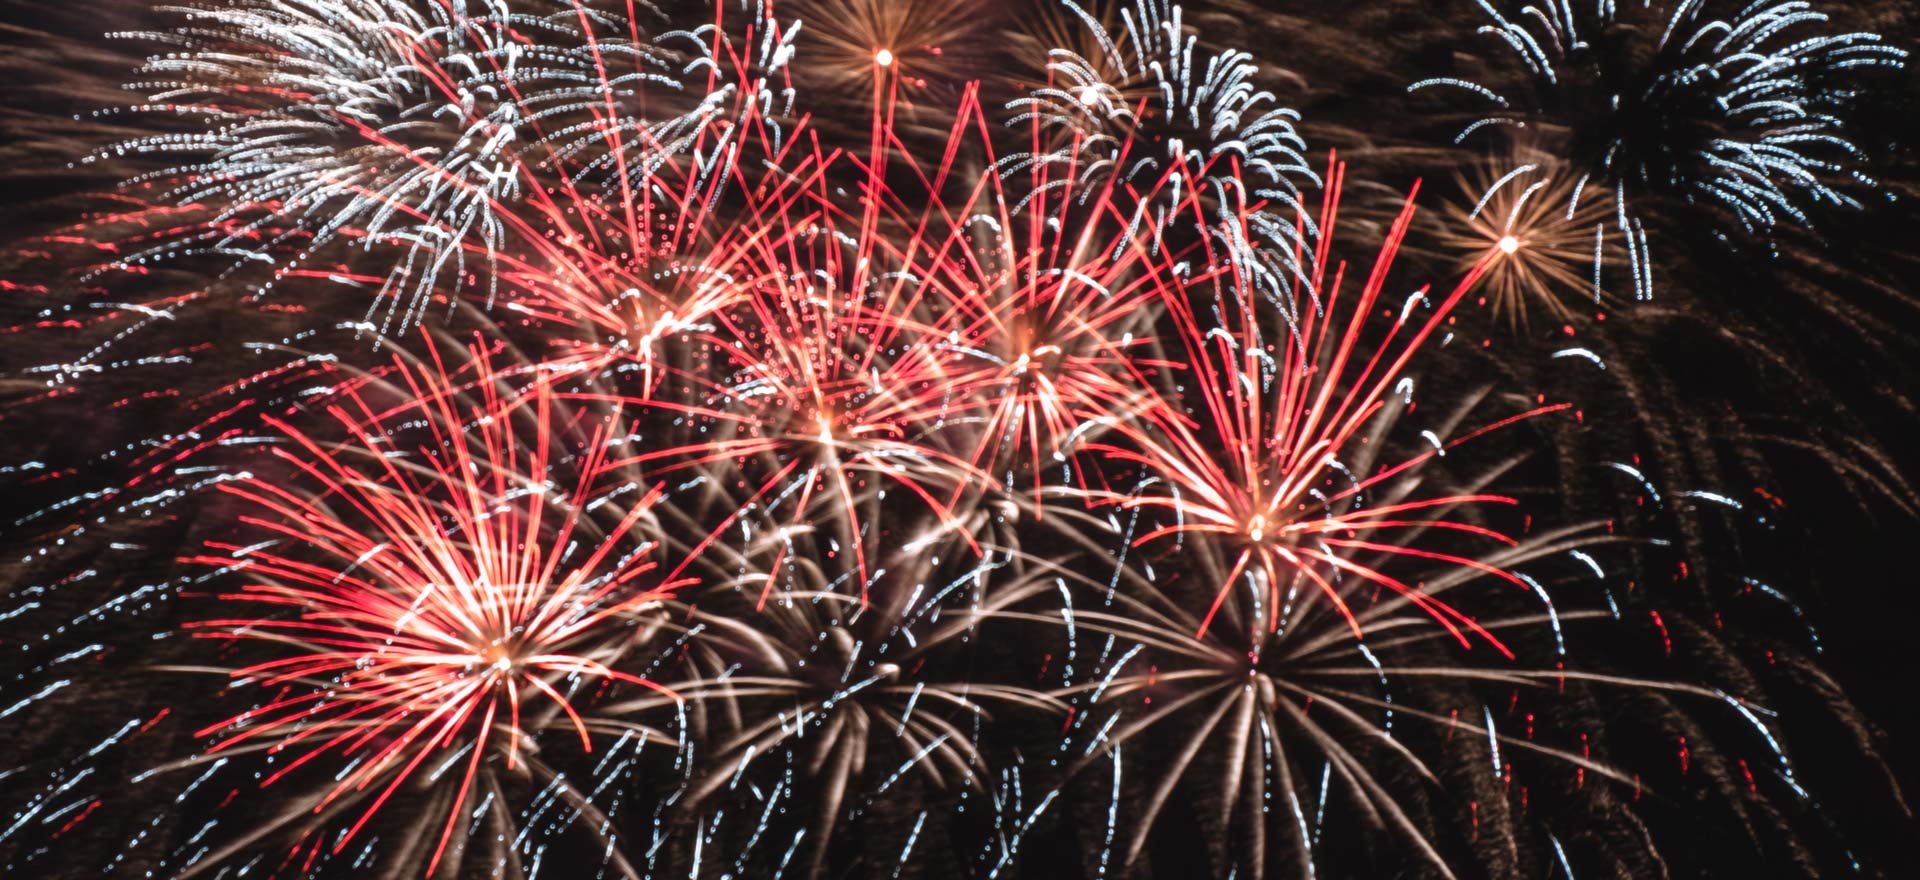 Essential Guide to Fireworks for Beginners: Safety, Effects, and Display Tips